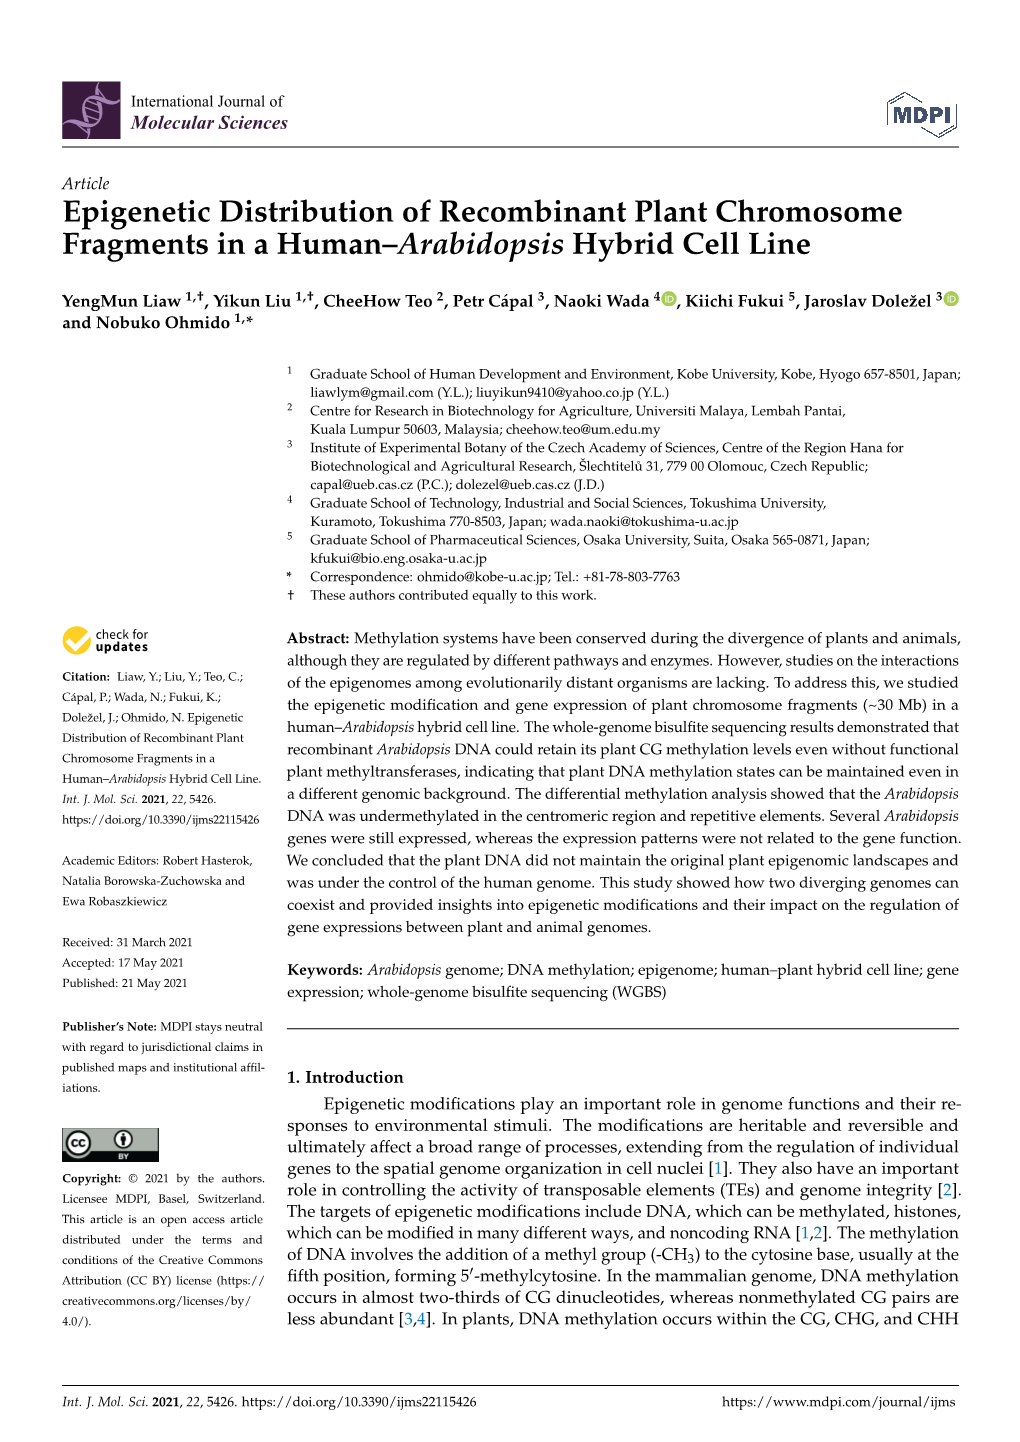 Epigenetic Distribution of Recombinant Plant Chromosome Fragments in a Human–Arabidopsis Hybrid Cell Line